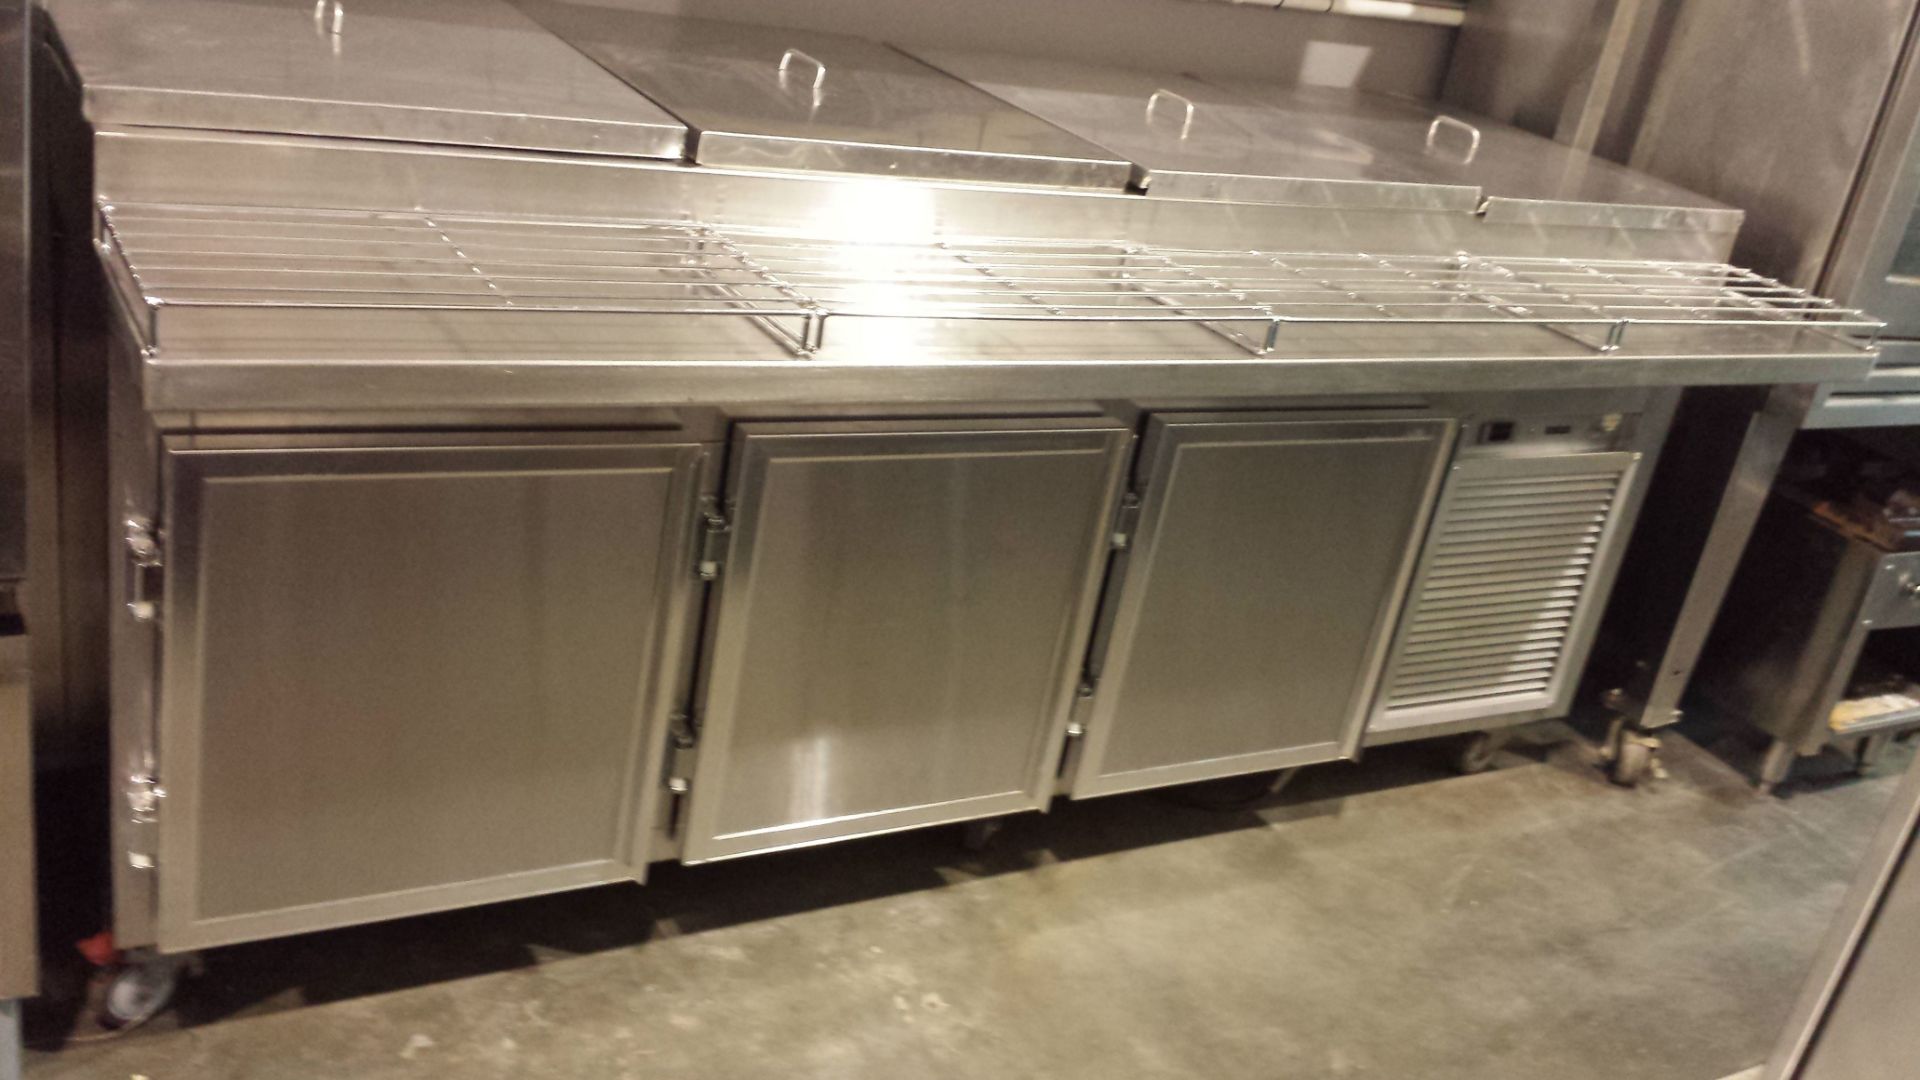 Bright Works custom 95 x 47" stainless steel Pizza Prep Table.  Complete with 2 tier over shelf, - Image 2 of 2